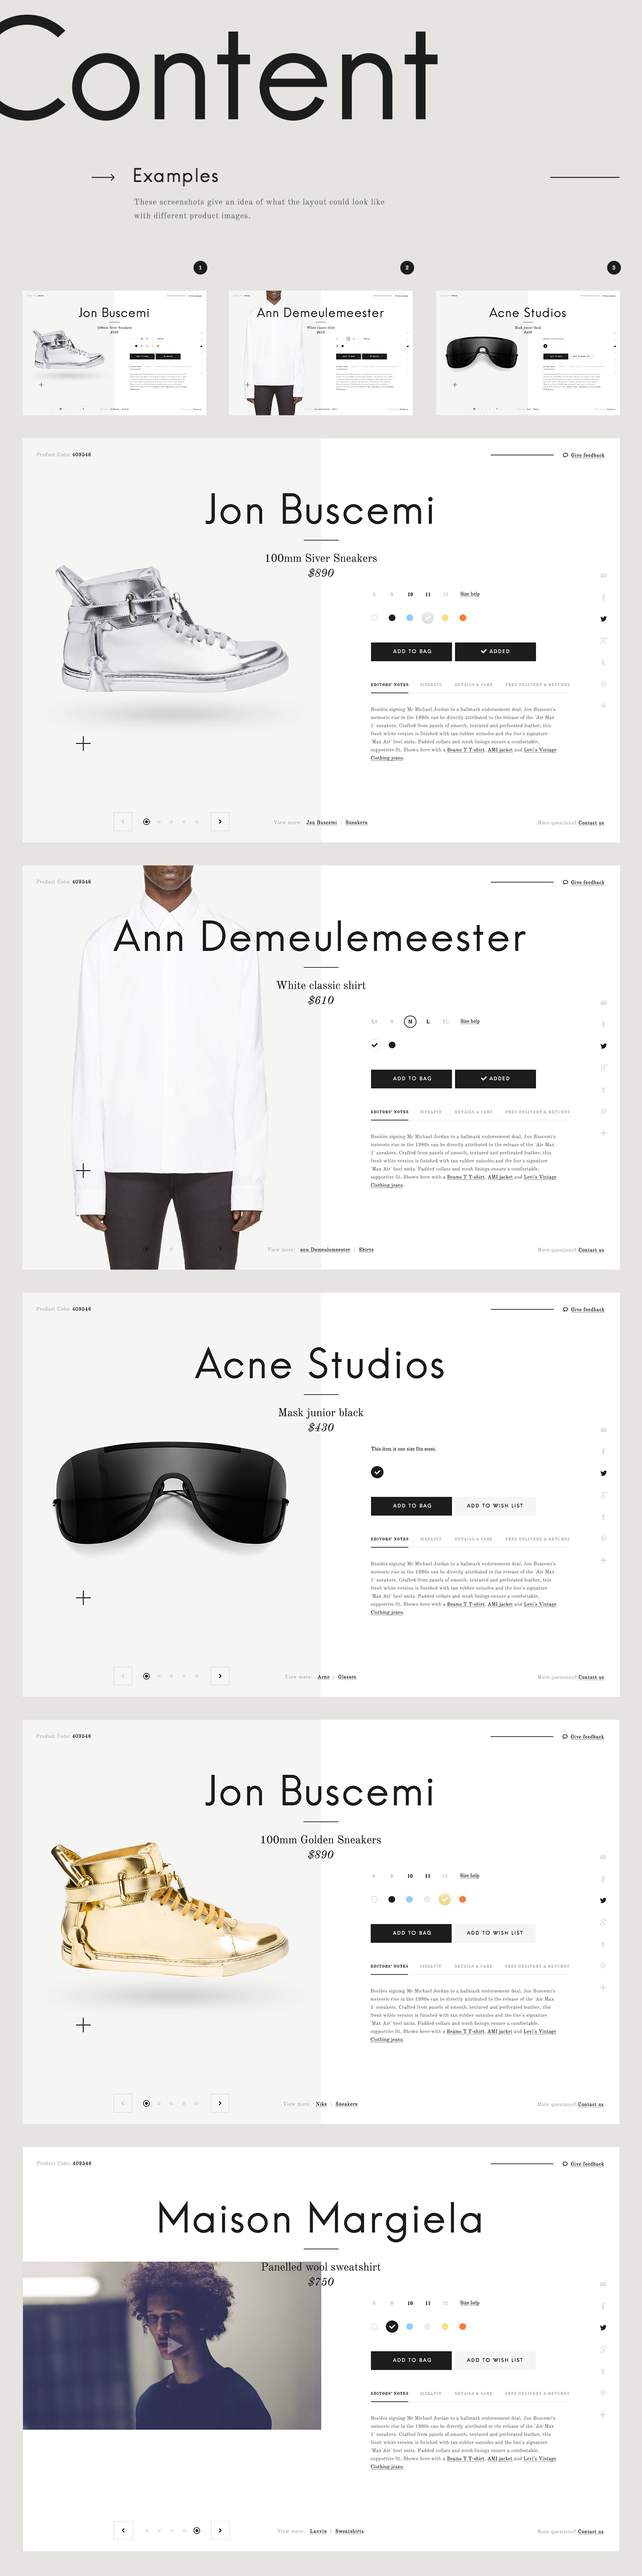 product redesign case study